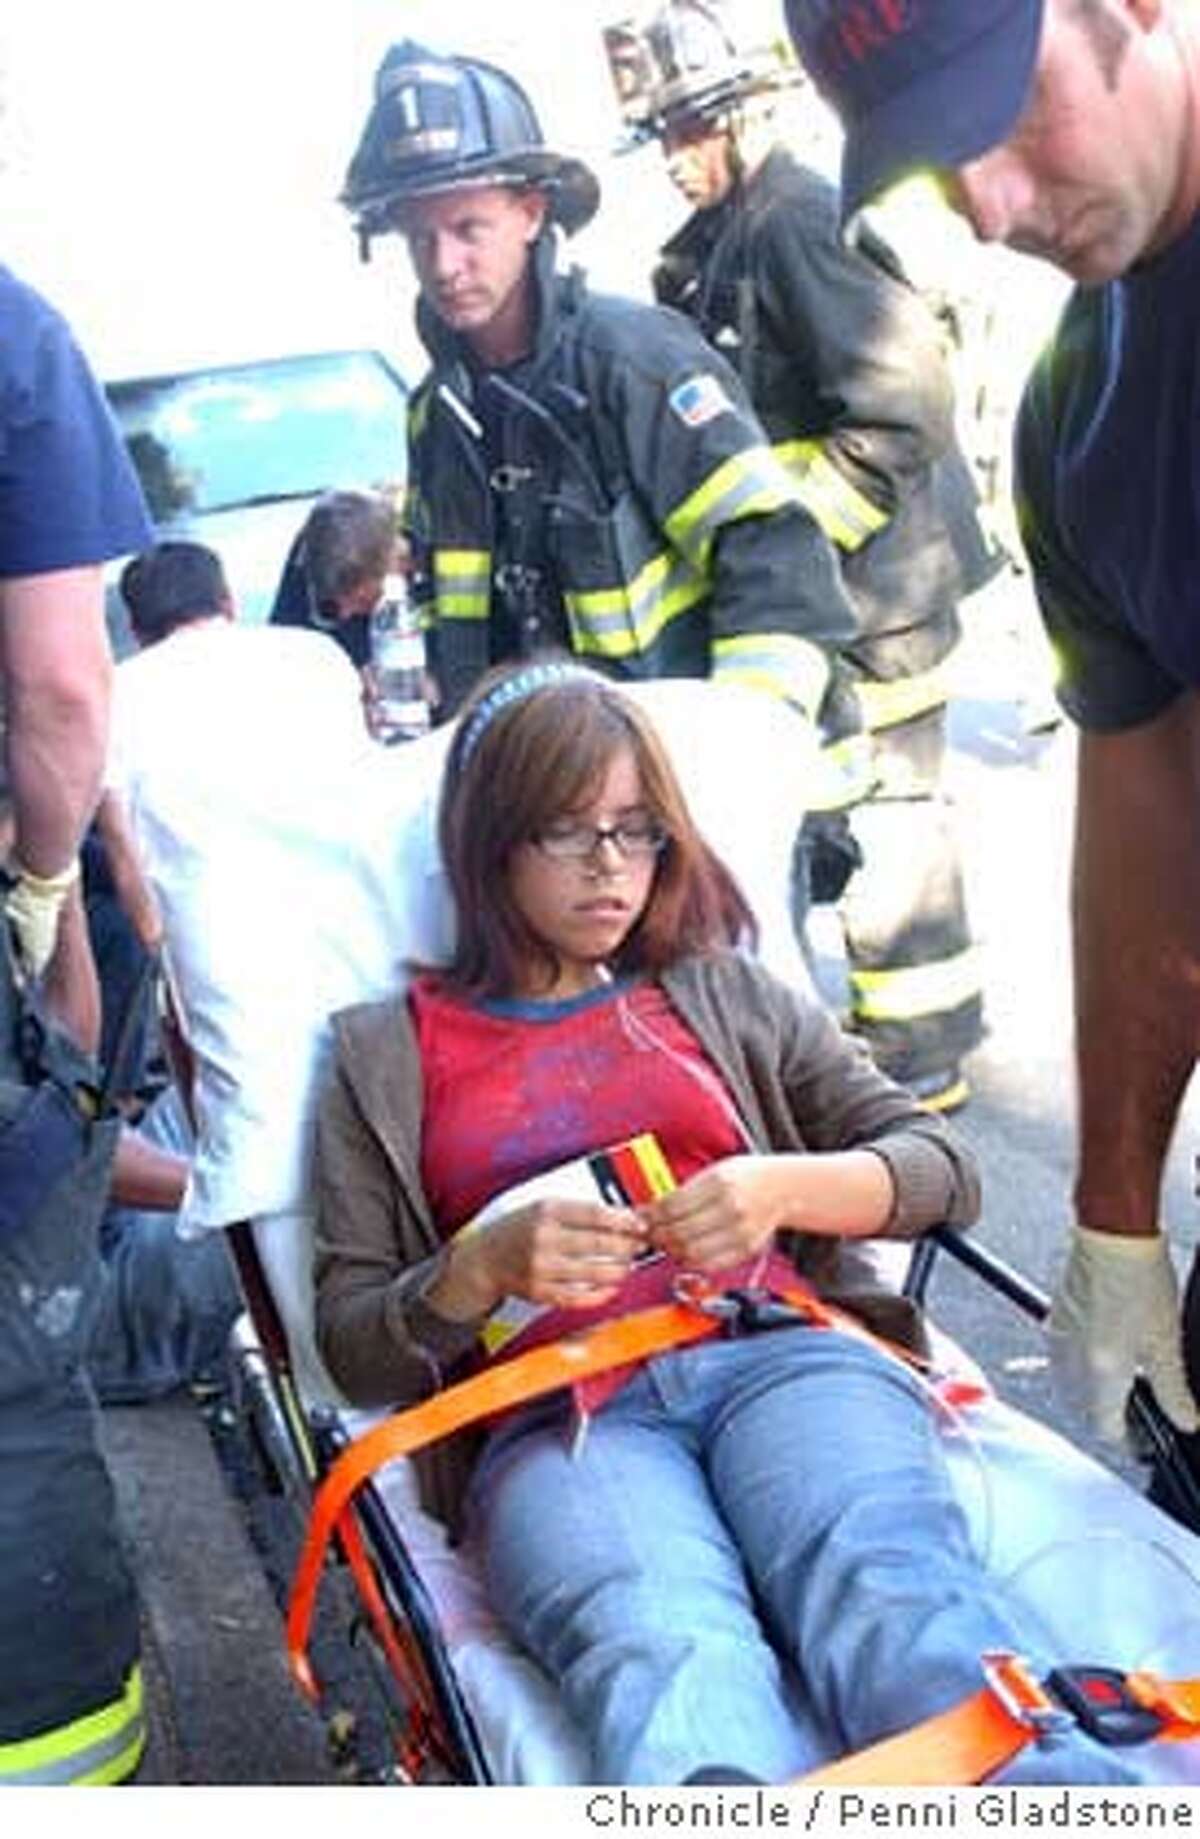 Zoe Mendez hurt in the theater goes to the hospital. Sequoia Theatre in Mill Valley was showing a matinee when part of the roof collapsed on the patrons who then ran out of the building covered in insulation. MV police and Sherriff and MV fire responded. About 33 people were in the theatre. 3 taken to hospital (ck) 8/16/04 in Mill Valley. Penni Gladstone / The Chronicle